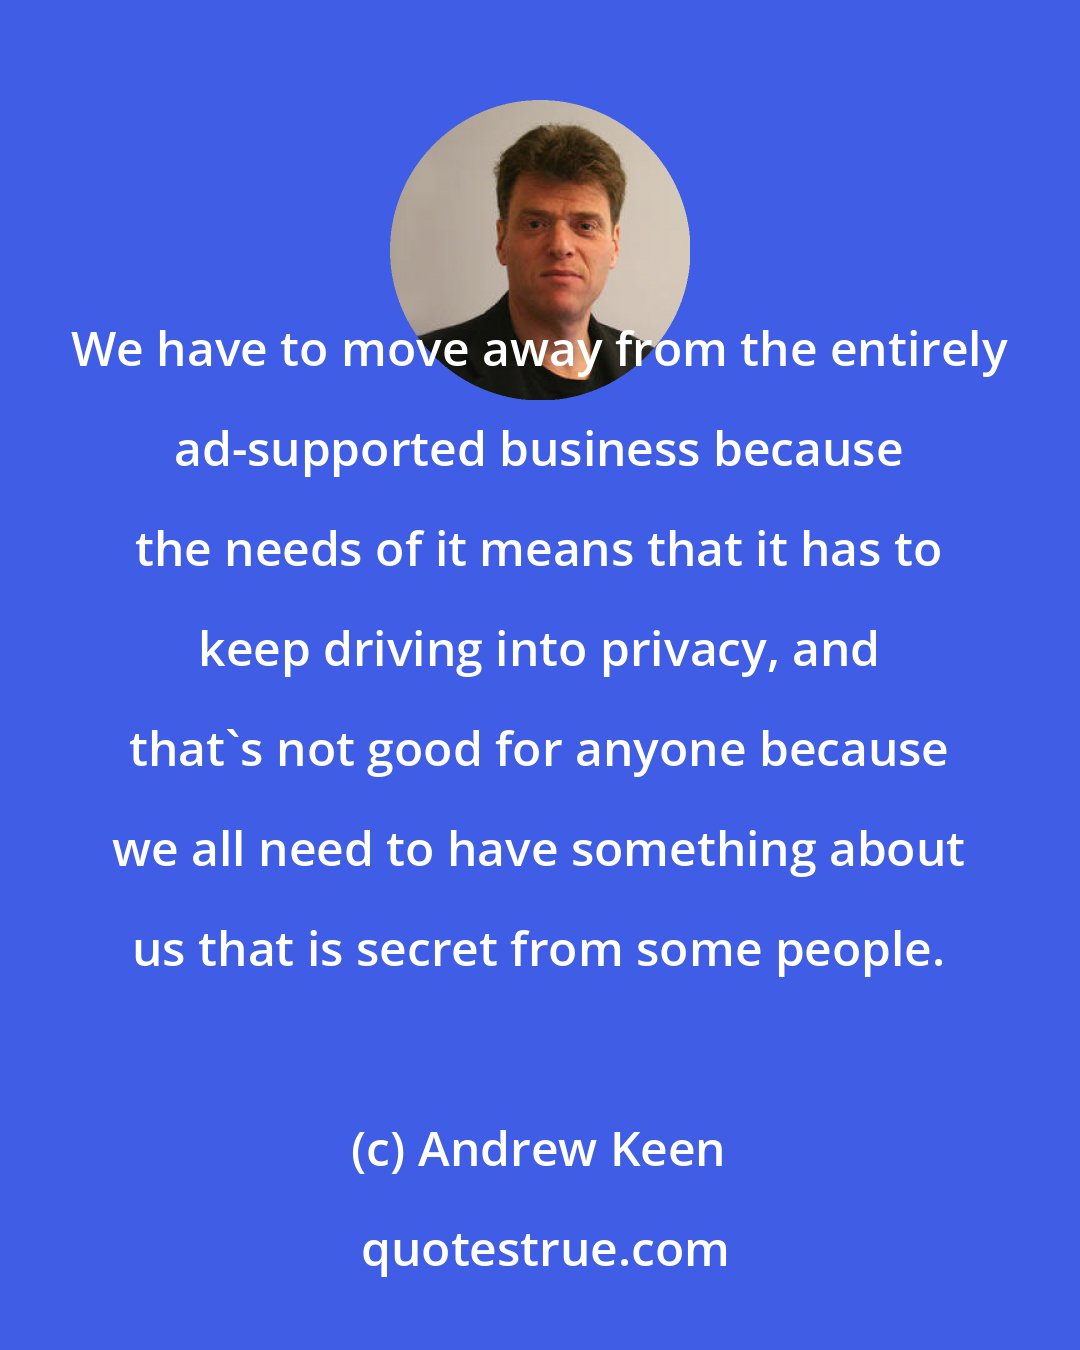 Andrew Keen: We have to move away from the entirely ad-supported business because the needs of it means that it has to keep driving into privacy, and that's not good for anyone because we all need to have something about us that is secret from some people.